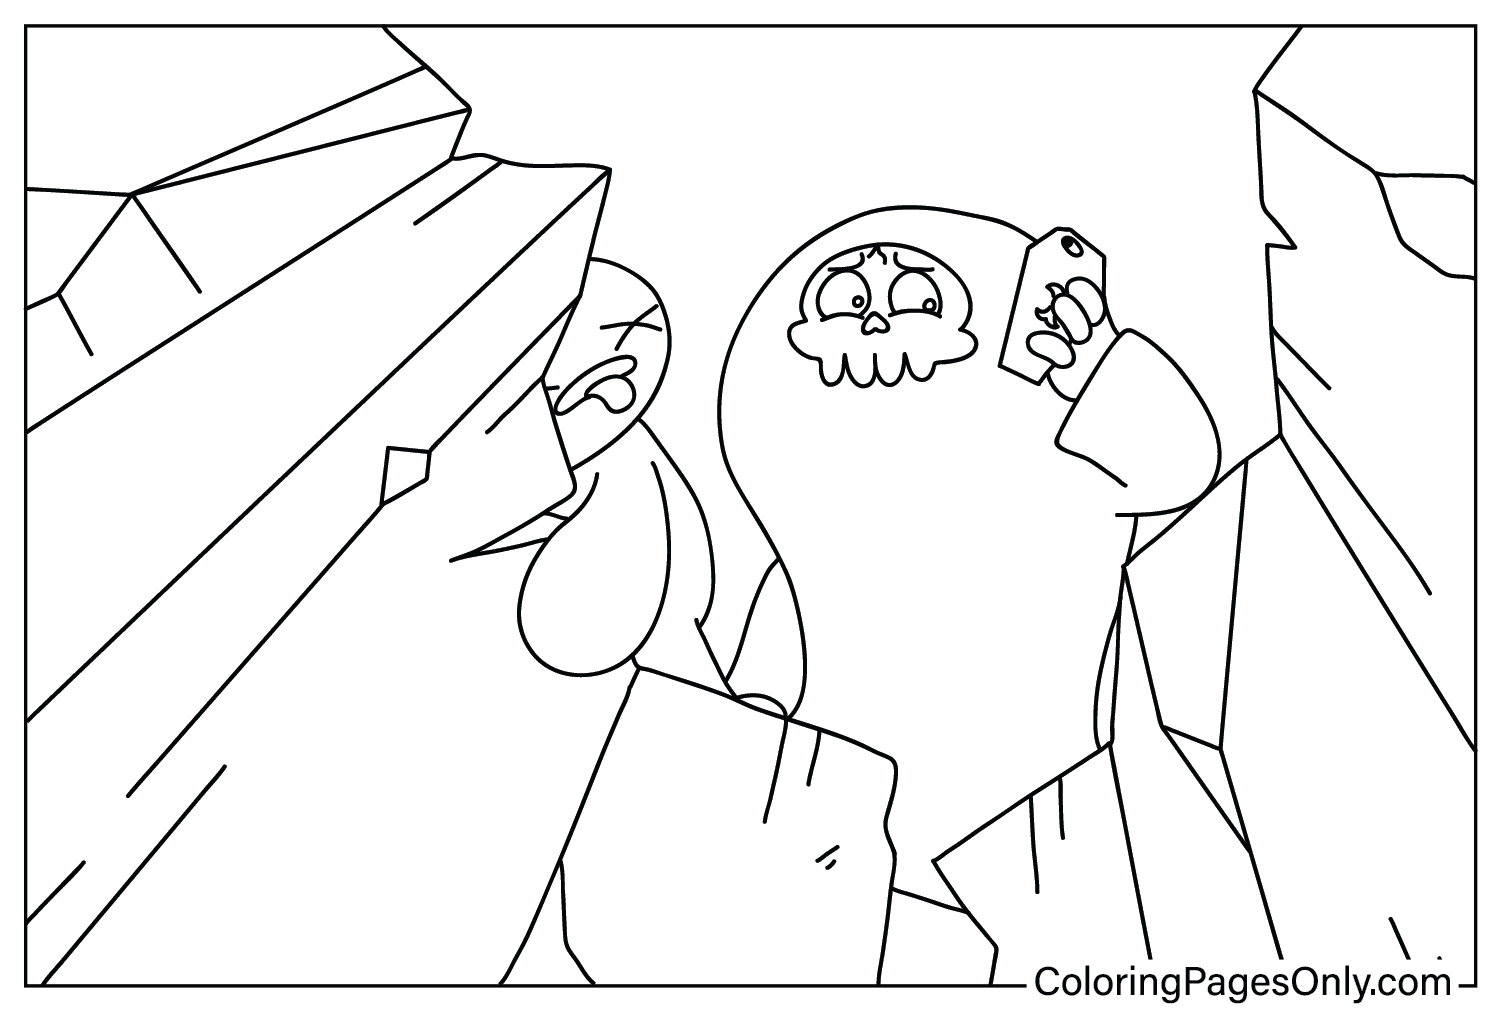 TheOdd1sOut Coloring Sheet from TheOdd1sOut